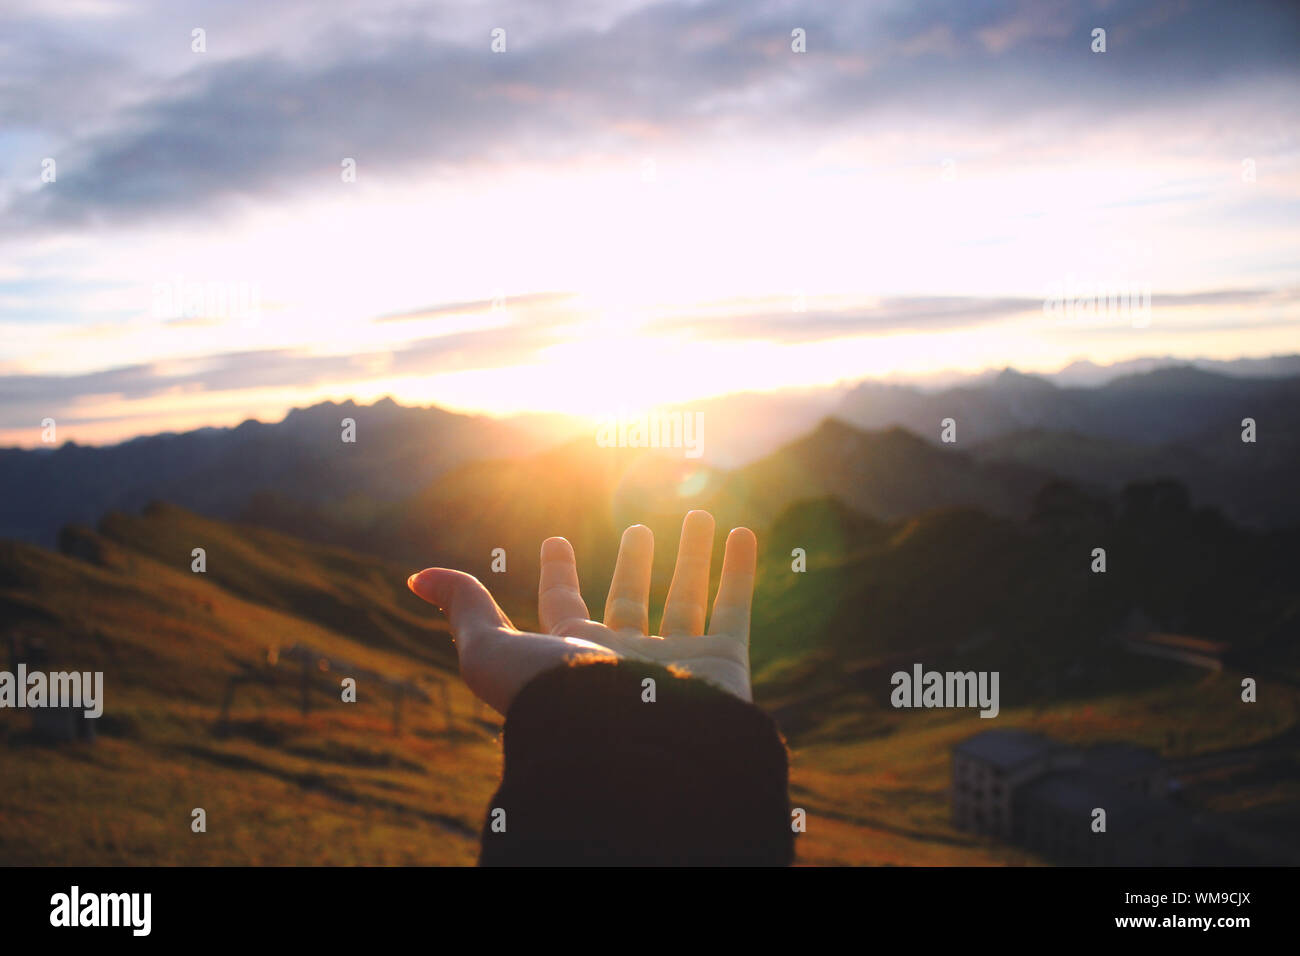 Hand Outstretched Towards Scenic View Of Mountains Stock Photo